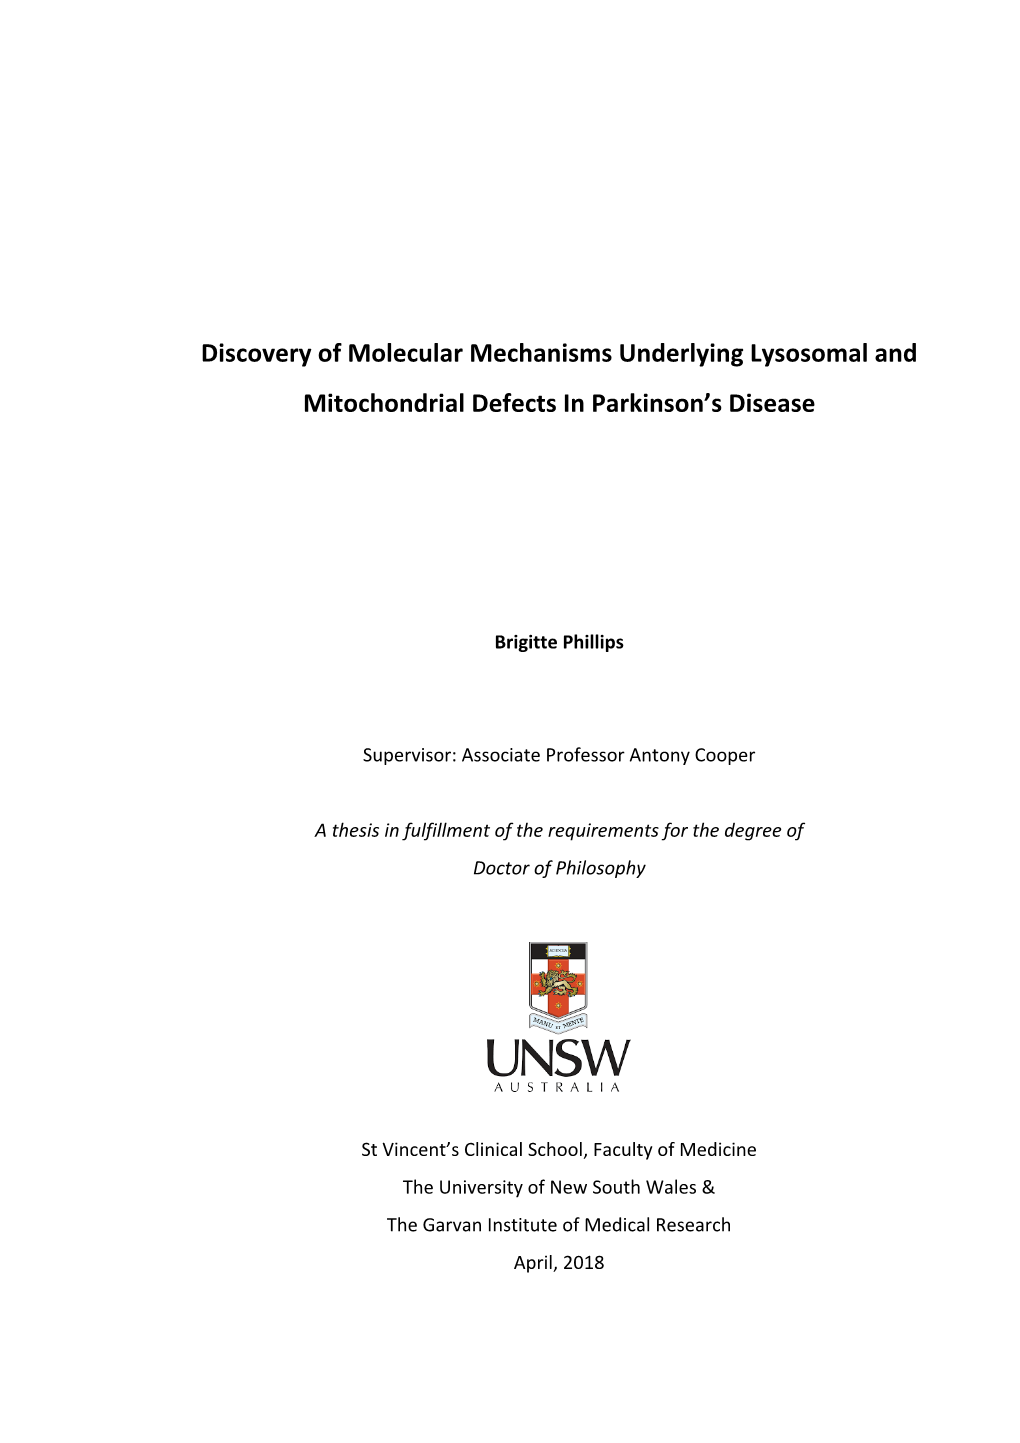 Discovery of Molecular Mechanisms Underlying Lysosomal and Mitochondrial Defects in Parkinson’S Disease